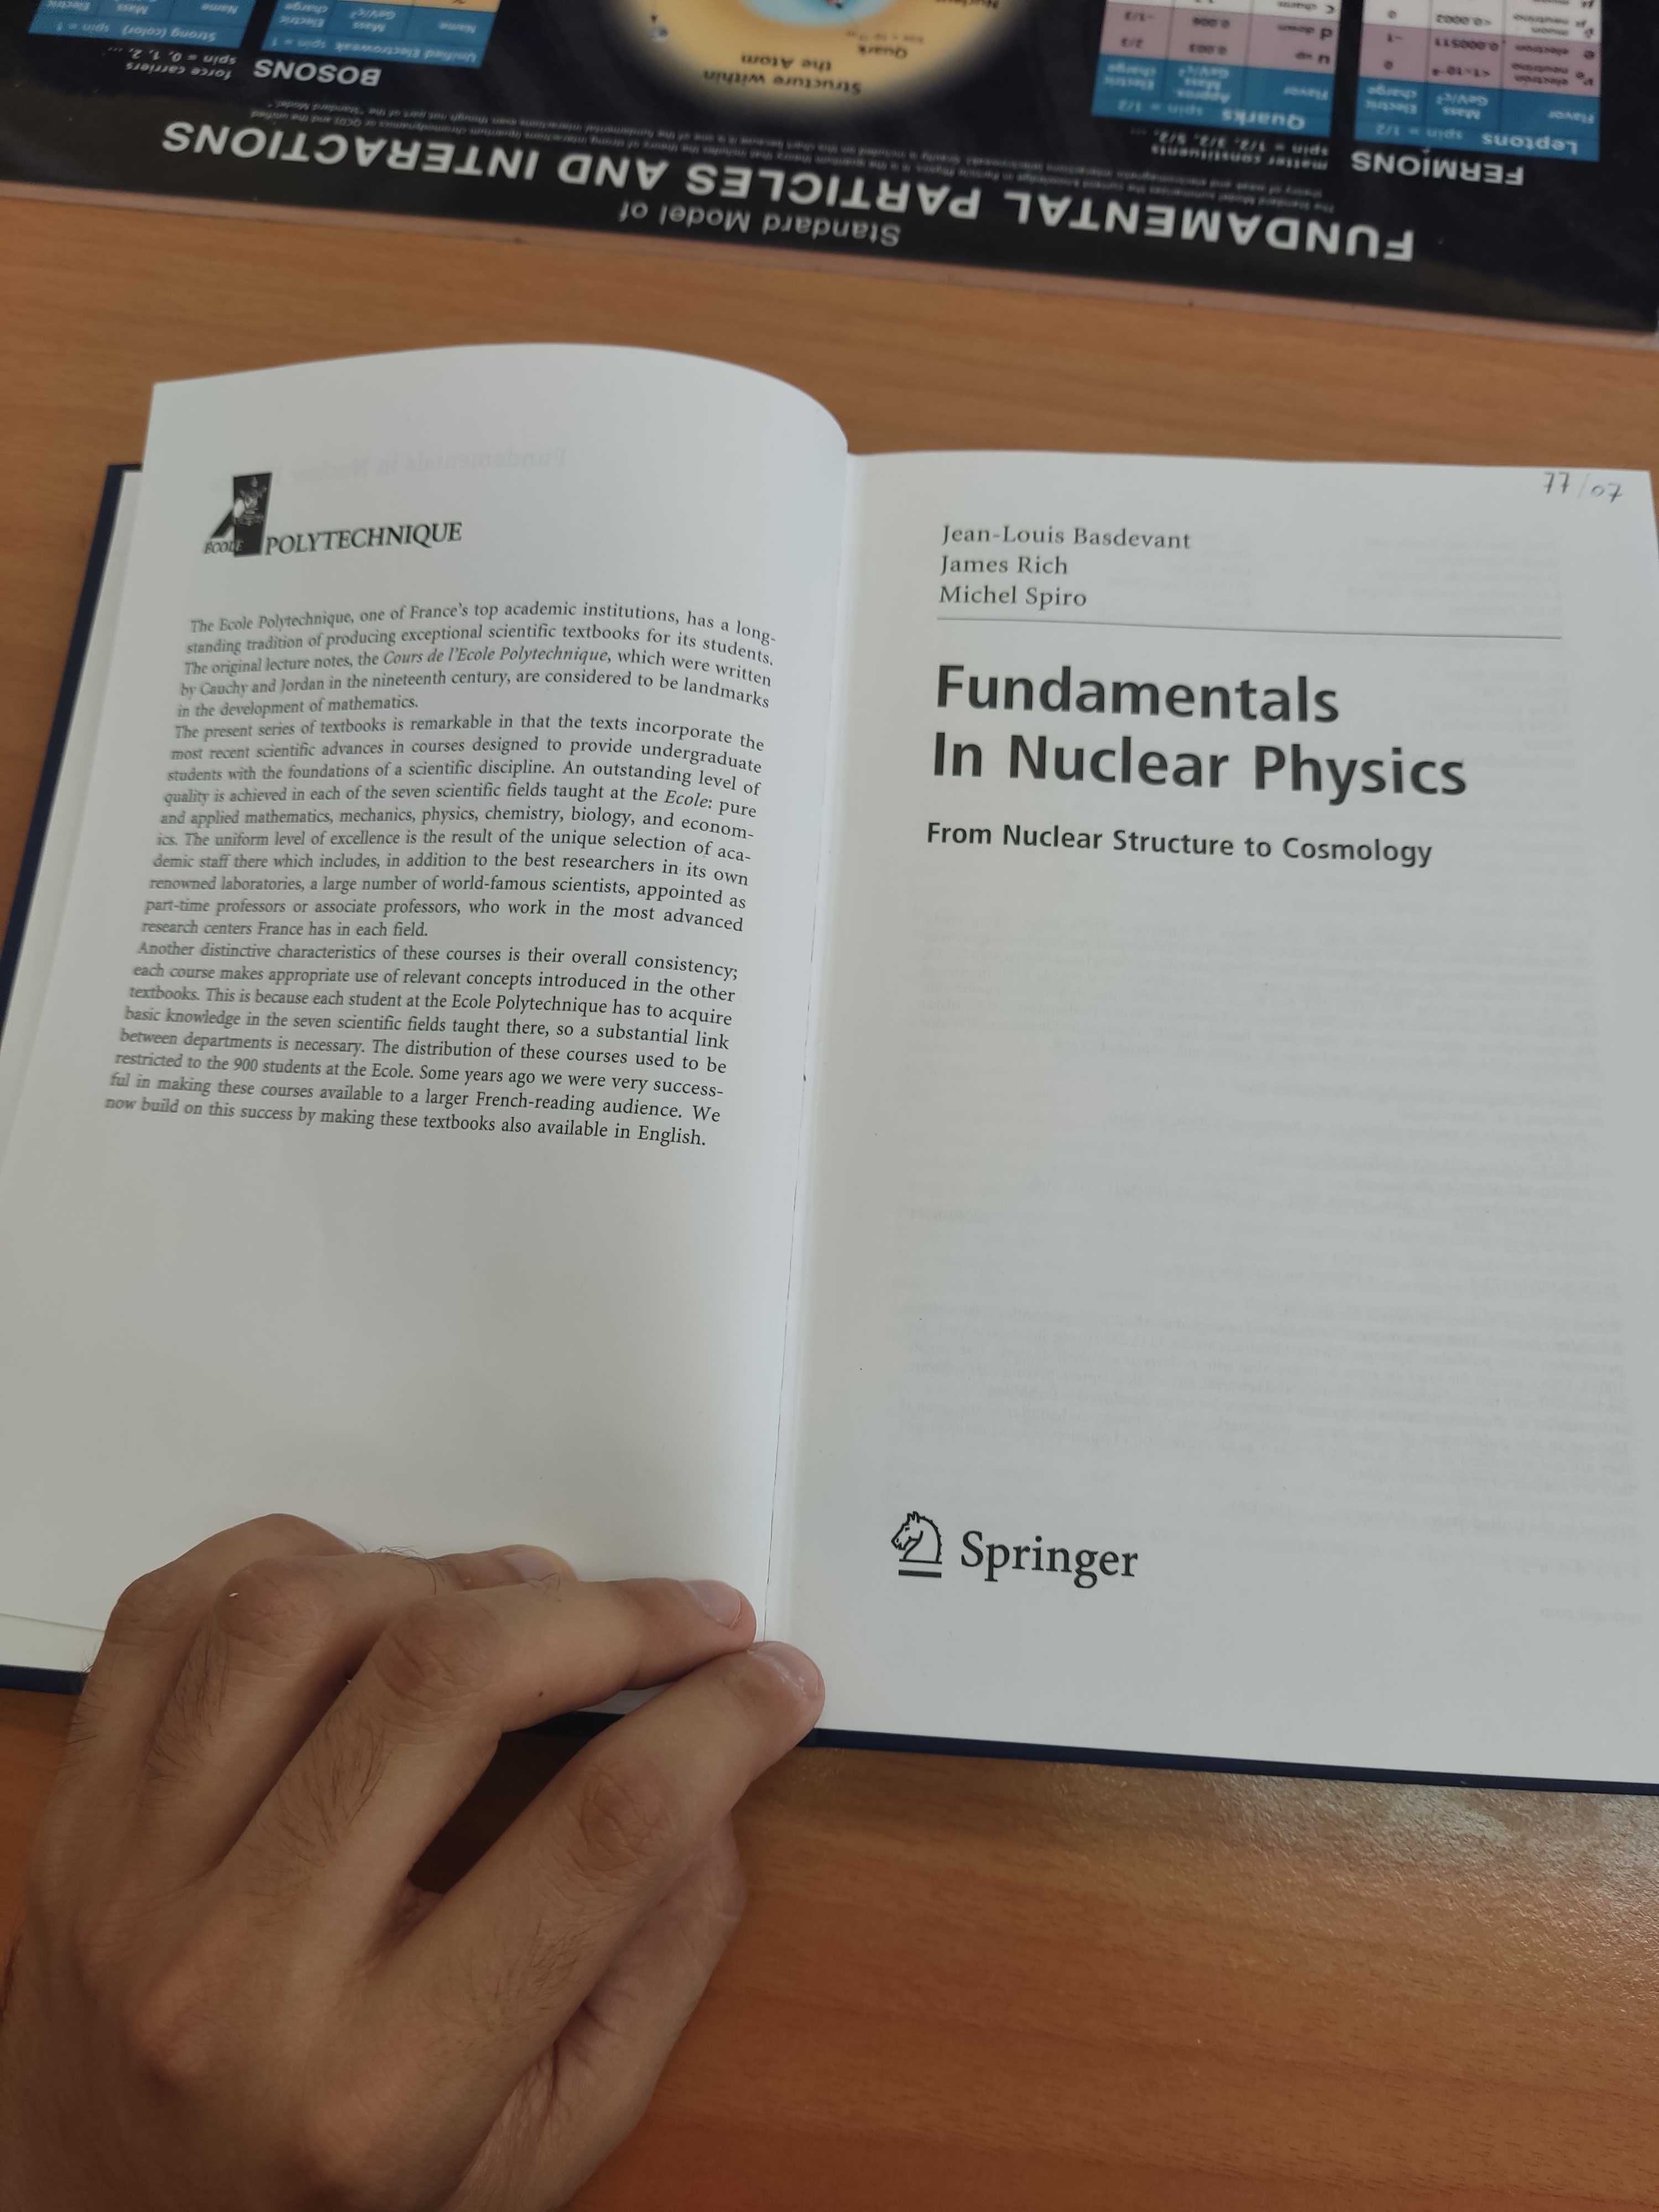 Fundamentals in Nuclear Physics: From Nuclear Structure to Cosmology